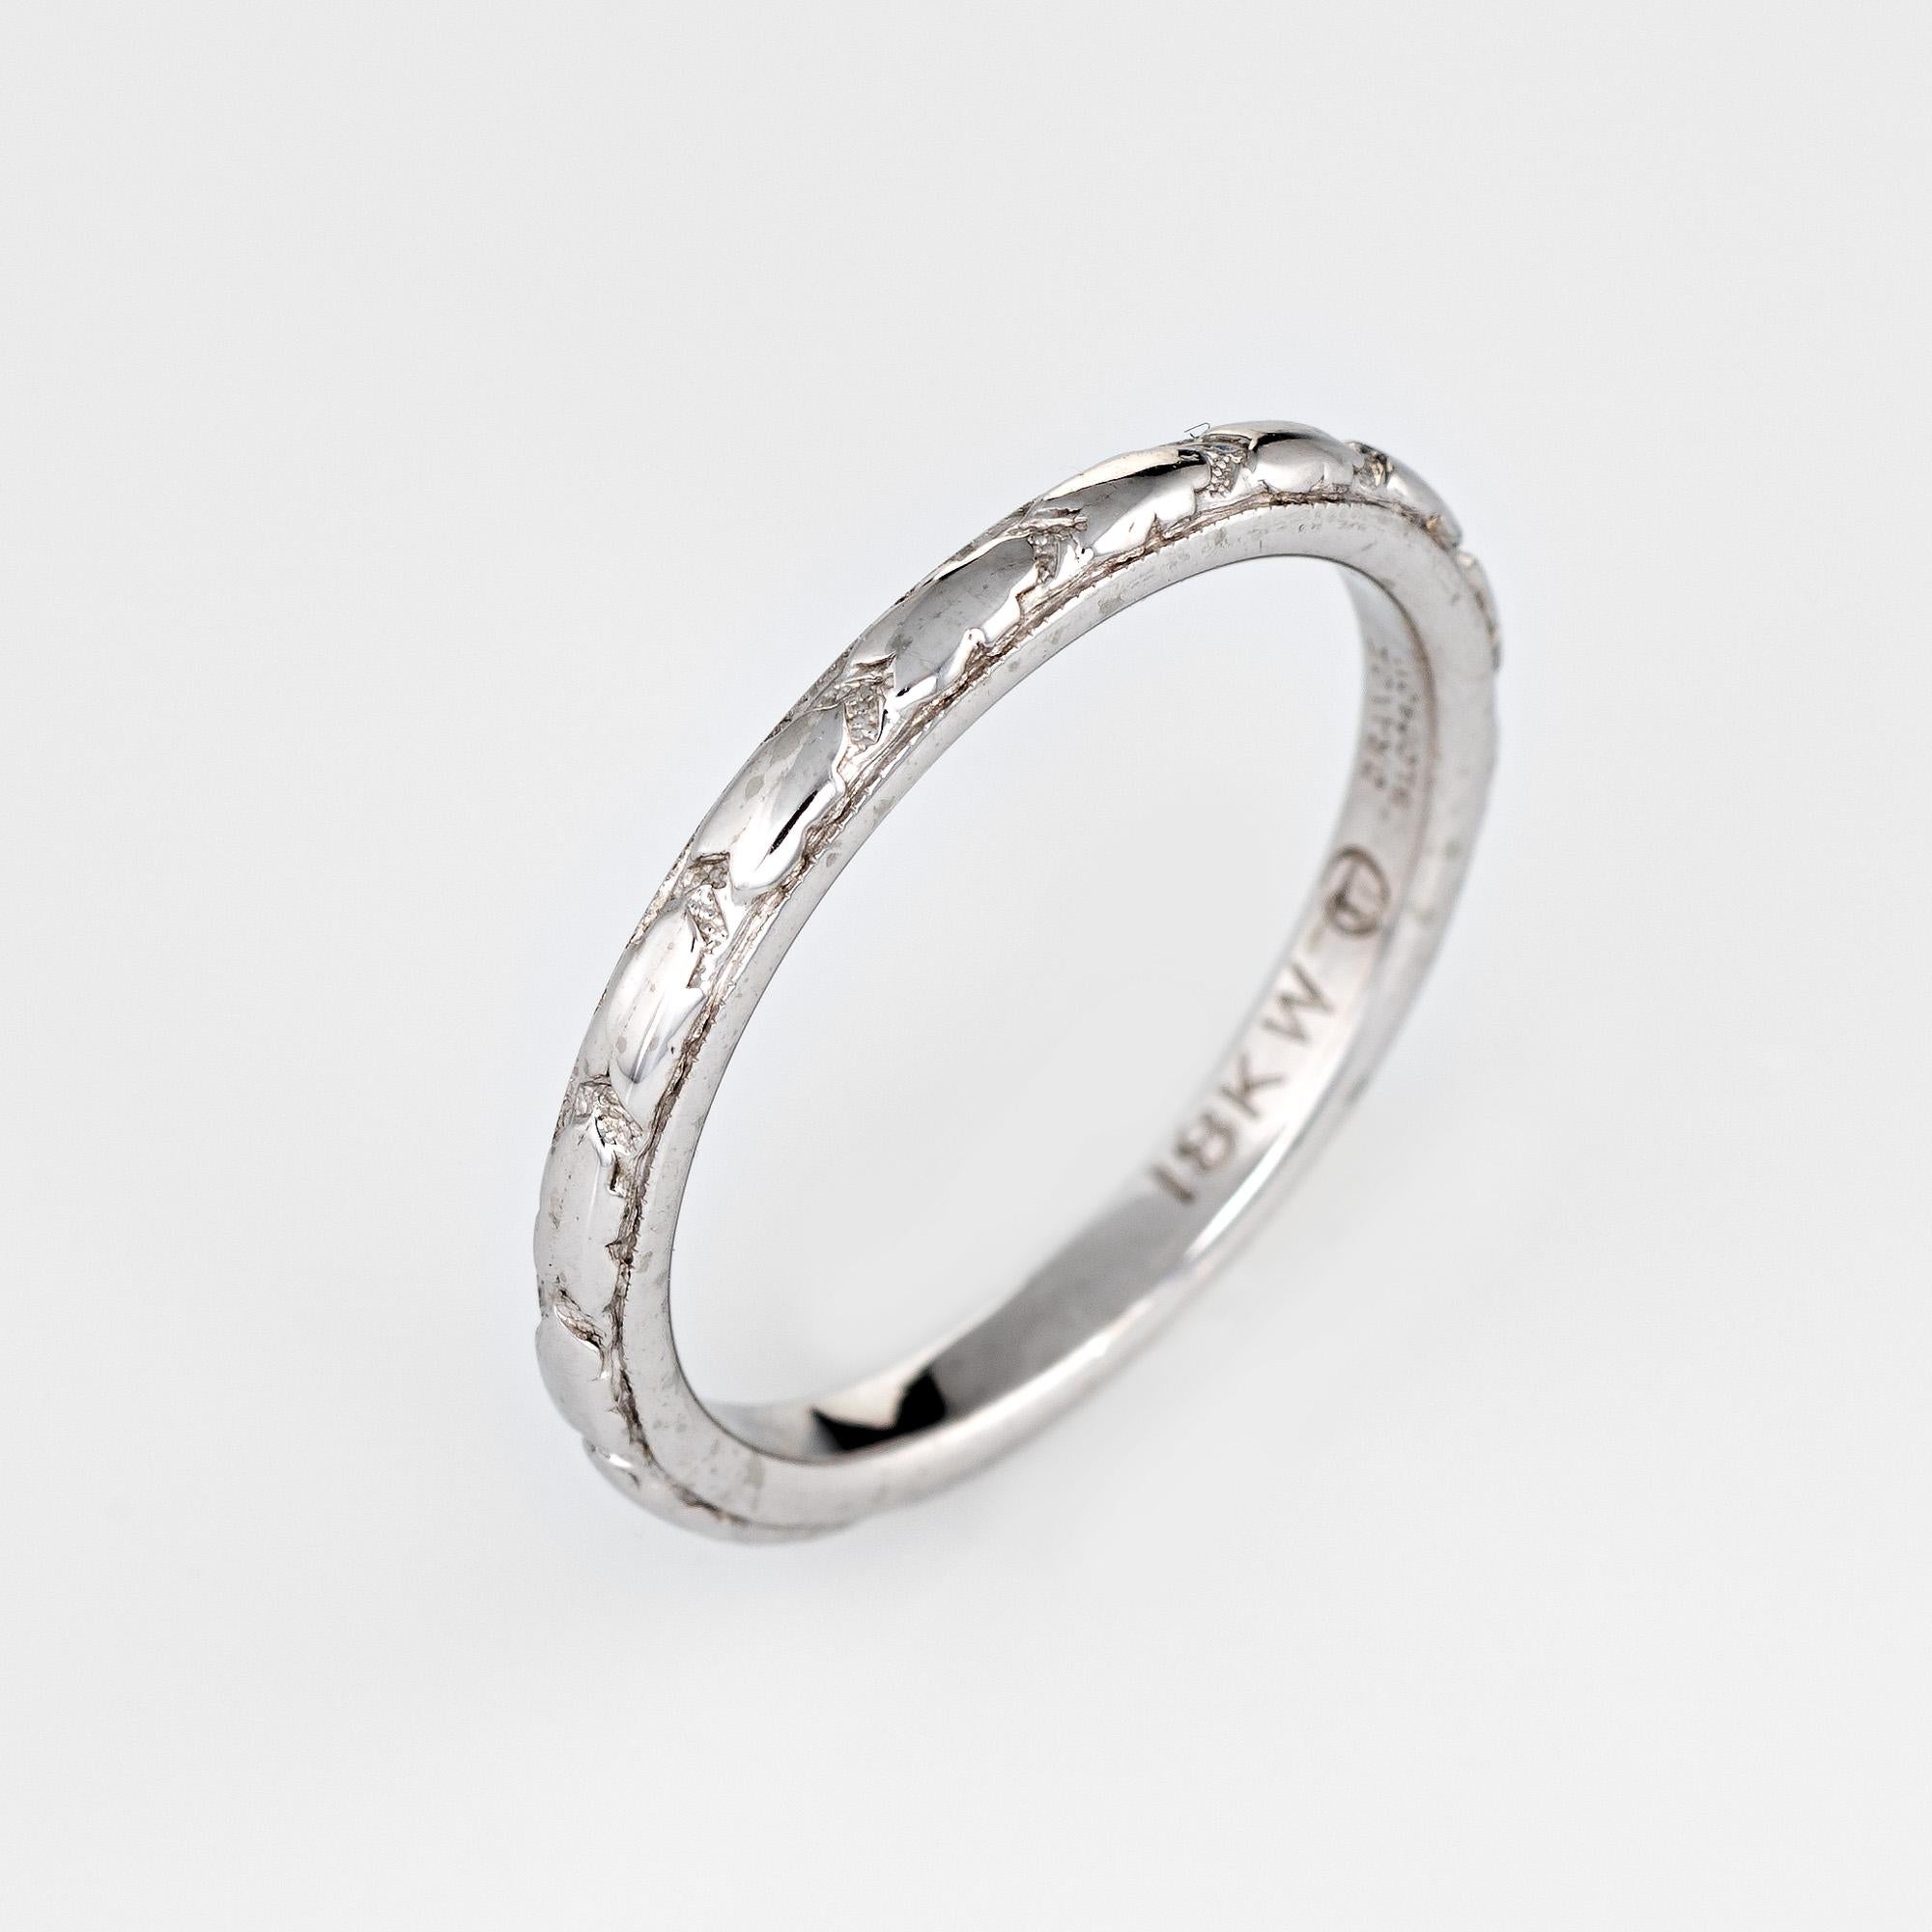 Stylish vintage Art Deco era wedding band (circa 1920s to 1930s) crafted in 18k white gold.

The ring is made by Traub of Detroit, Michigan. The orange blossom line was a popular design during the 1920s. The ring is great worn as a wedding band or